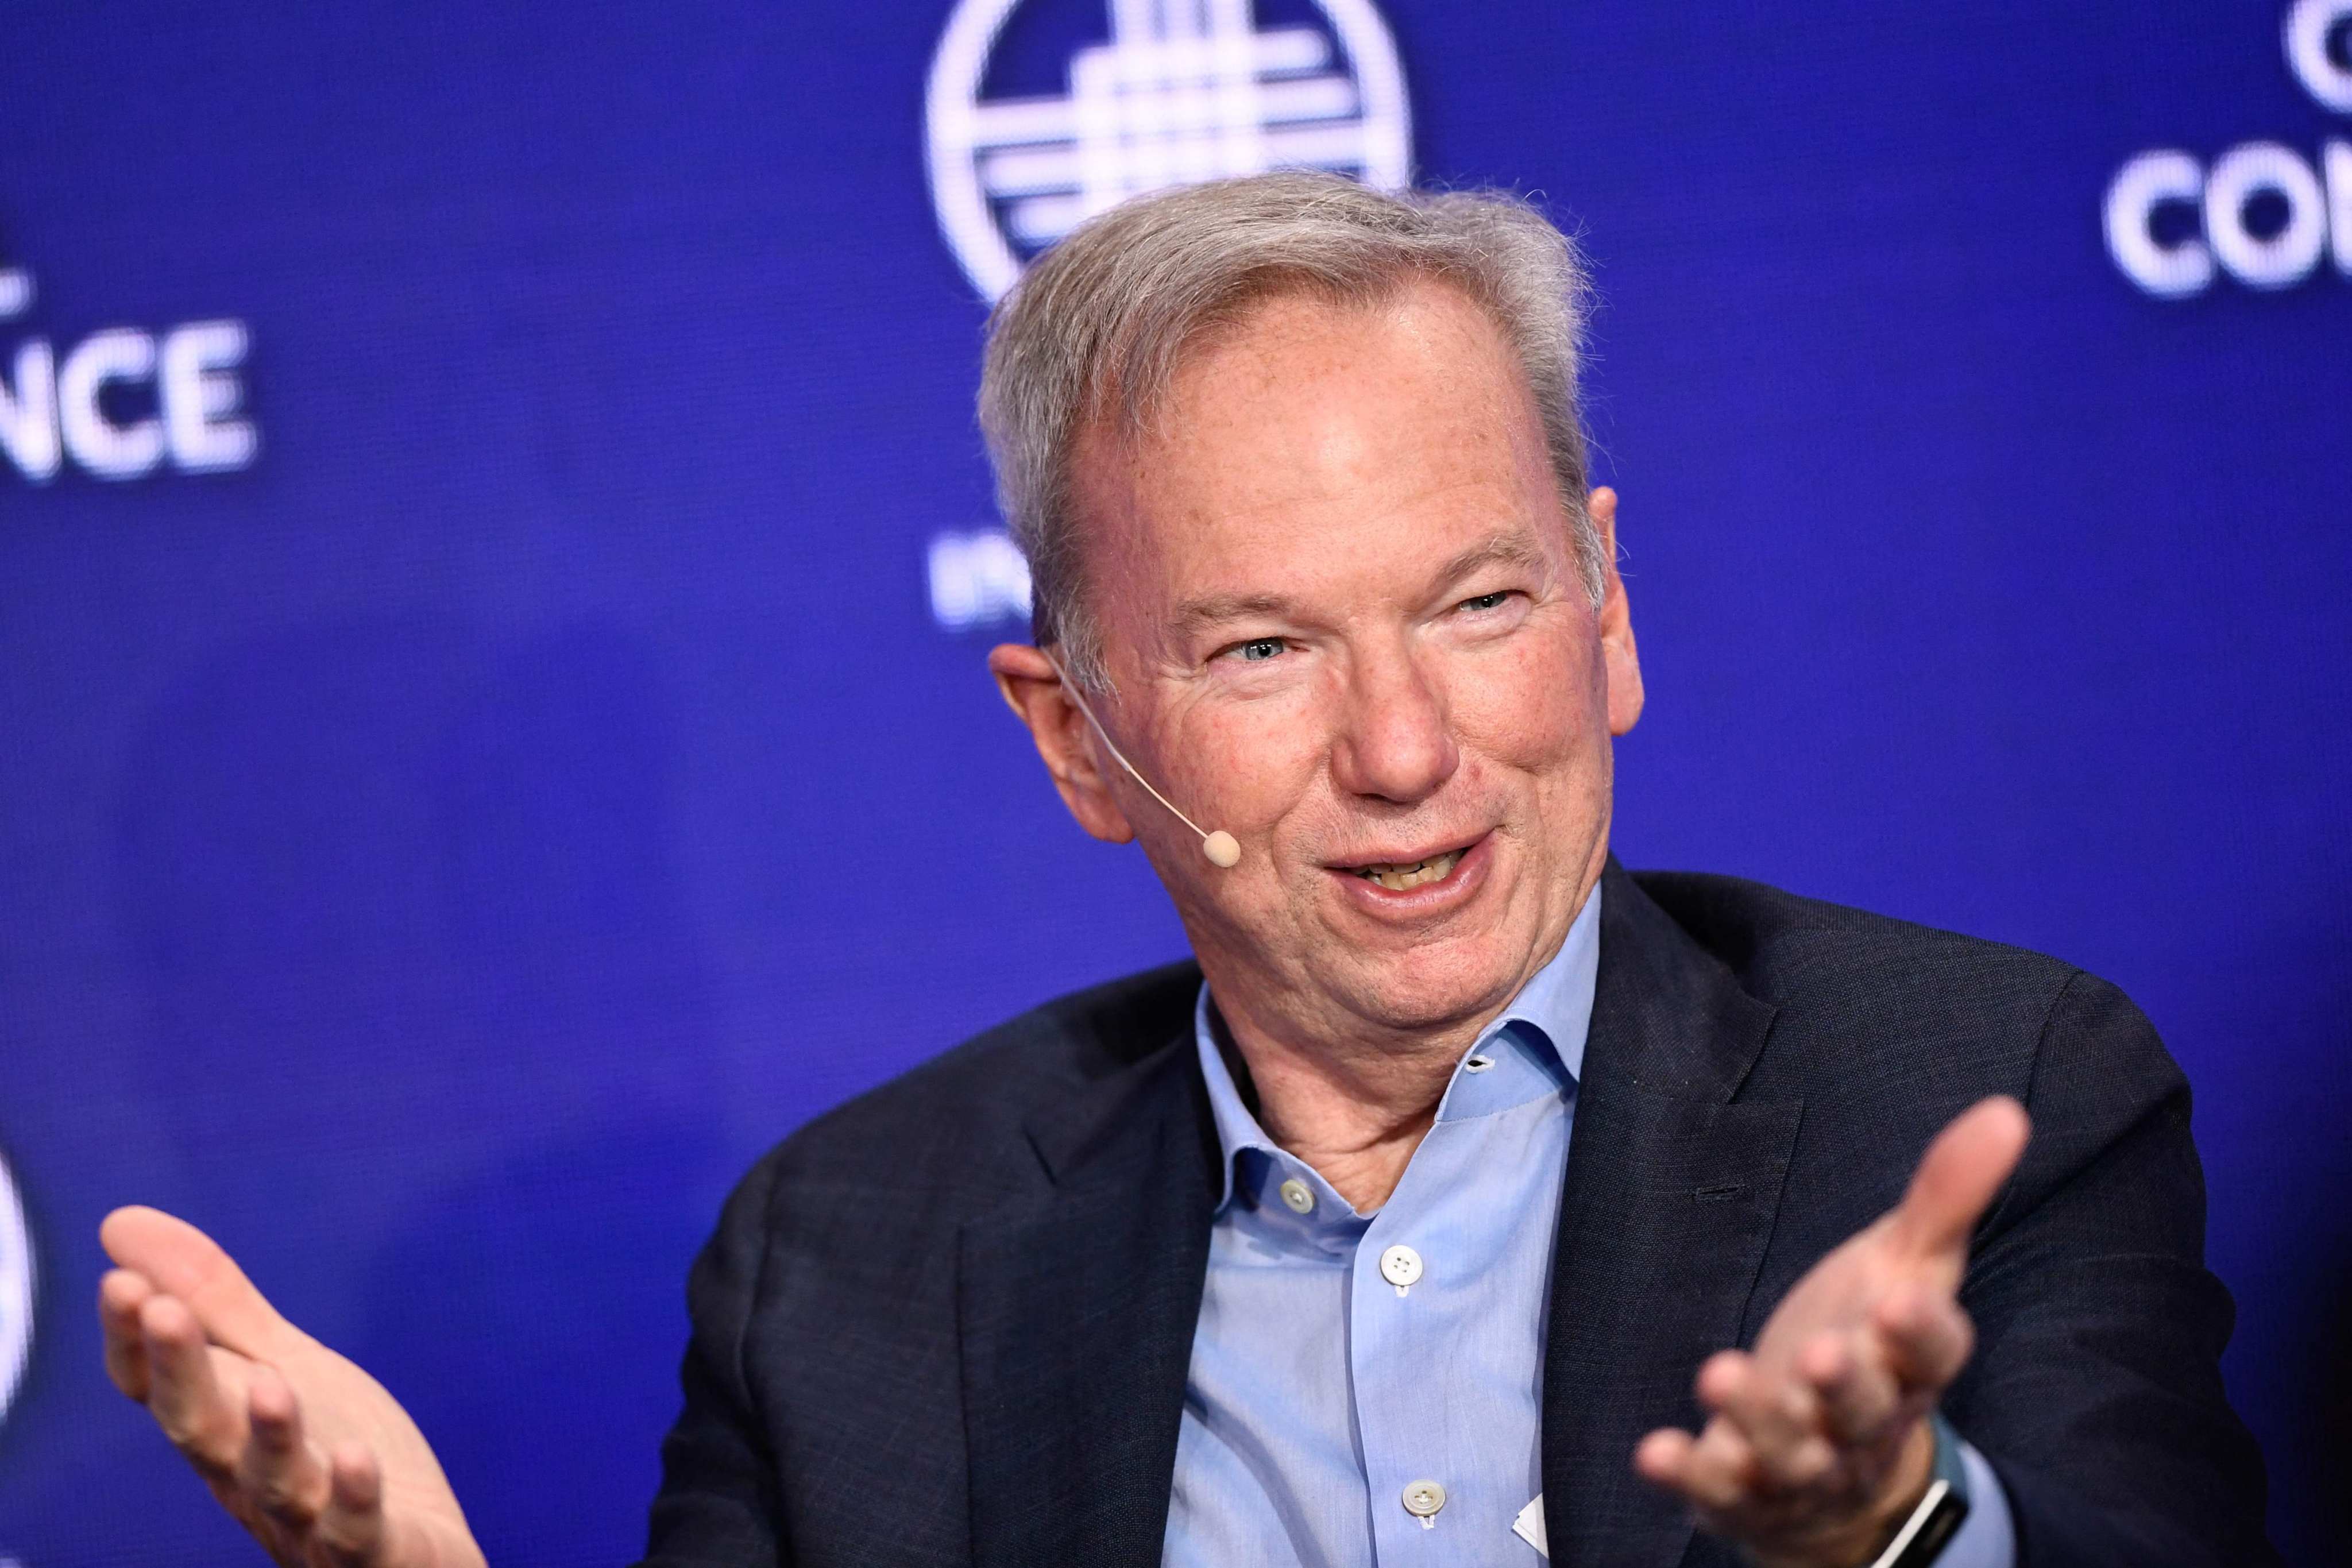 In this file photo taken May 2, 2022, Eric Schmidt speaks during the Milken Institute Global Conference in Beverly Hills, California. Photo: AFP